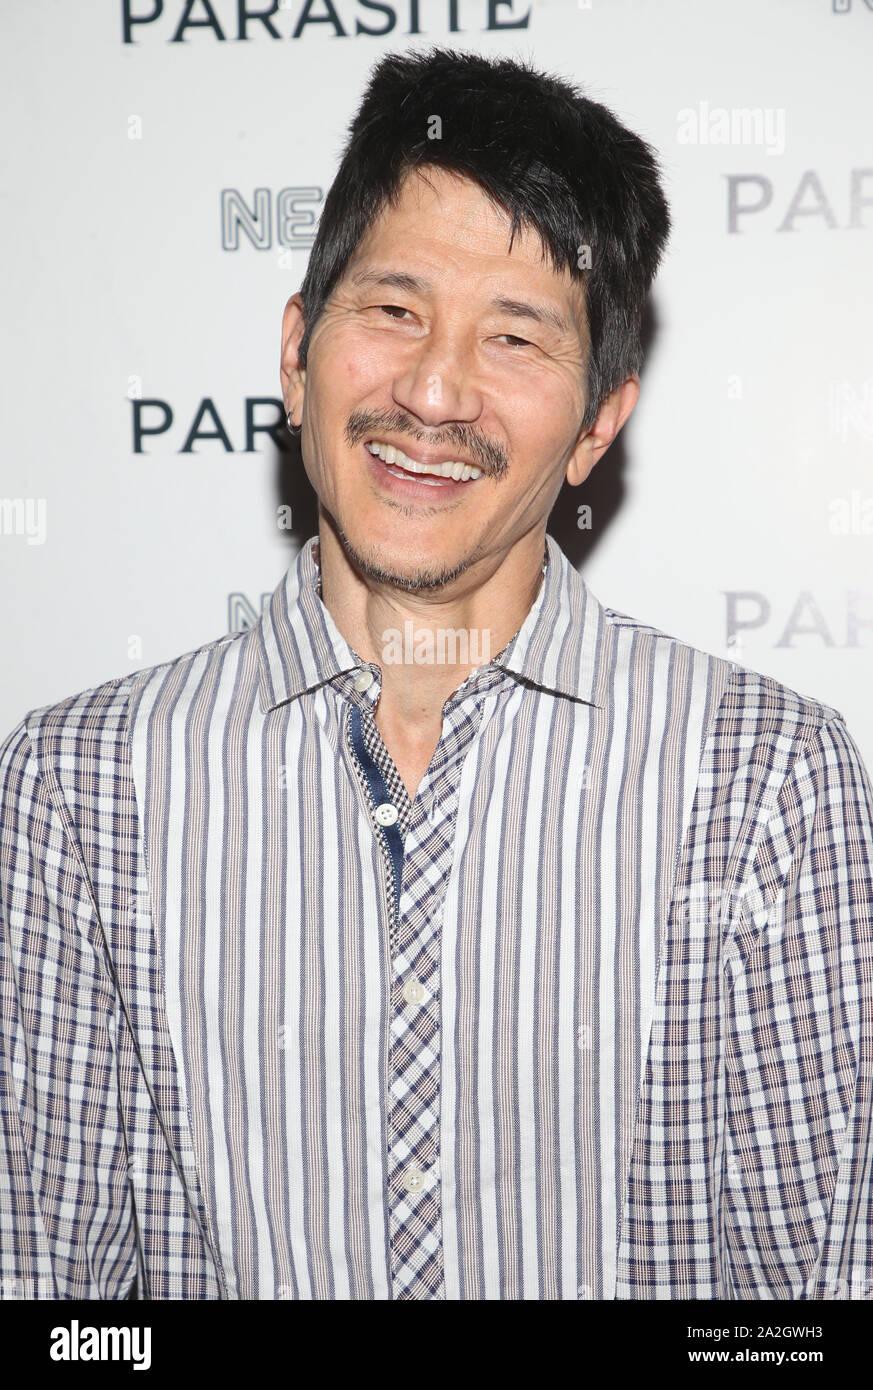 Hollywood, Ca. 2nd Oct, 2019. Greg Araki, at Neon Presents Los Angeles Premiere Of 'Parasite' at ArcLight Hollywood in Hollywood, California on October 2, 2019. Credit: Faye Sadou/Media Punch/Alamy Live News Stock Photo